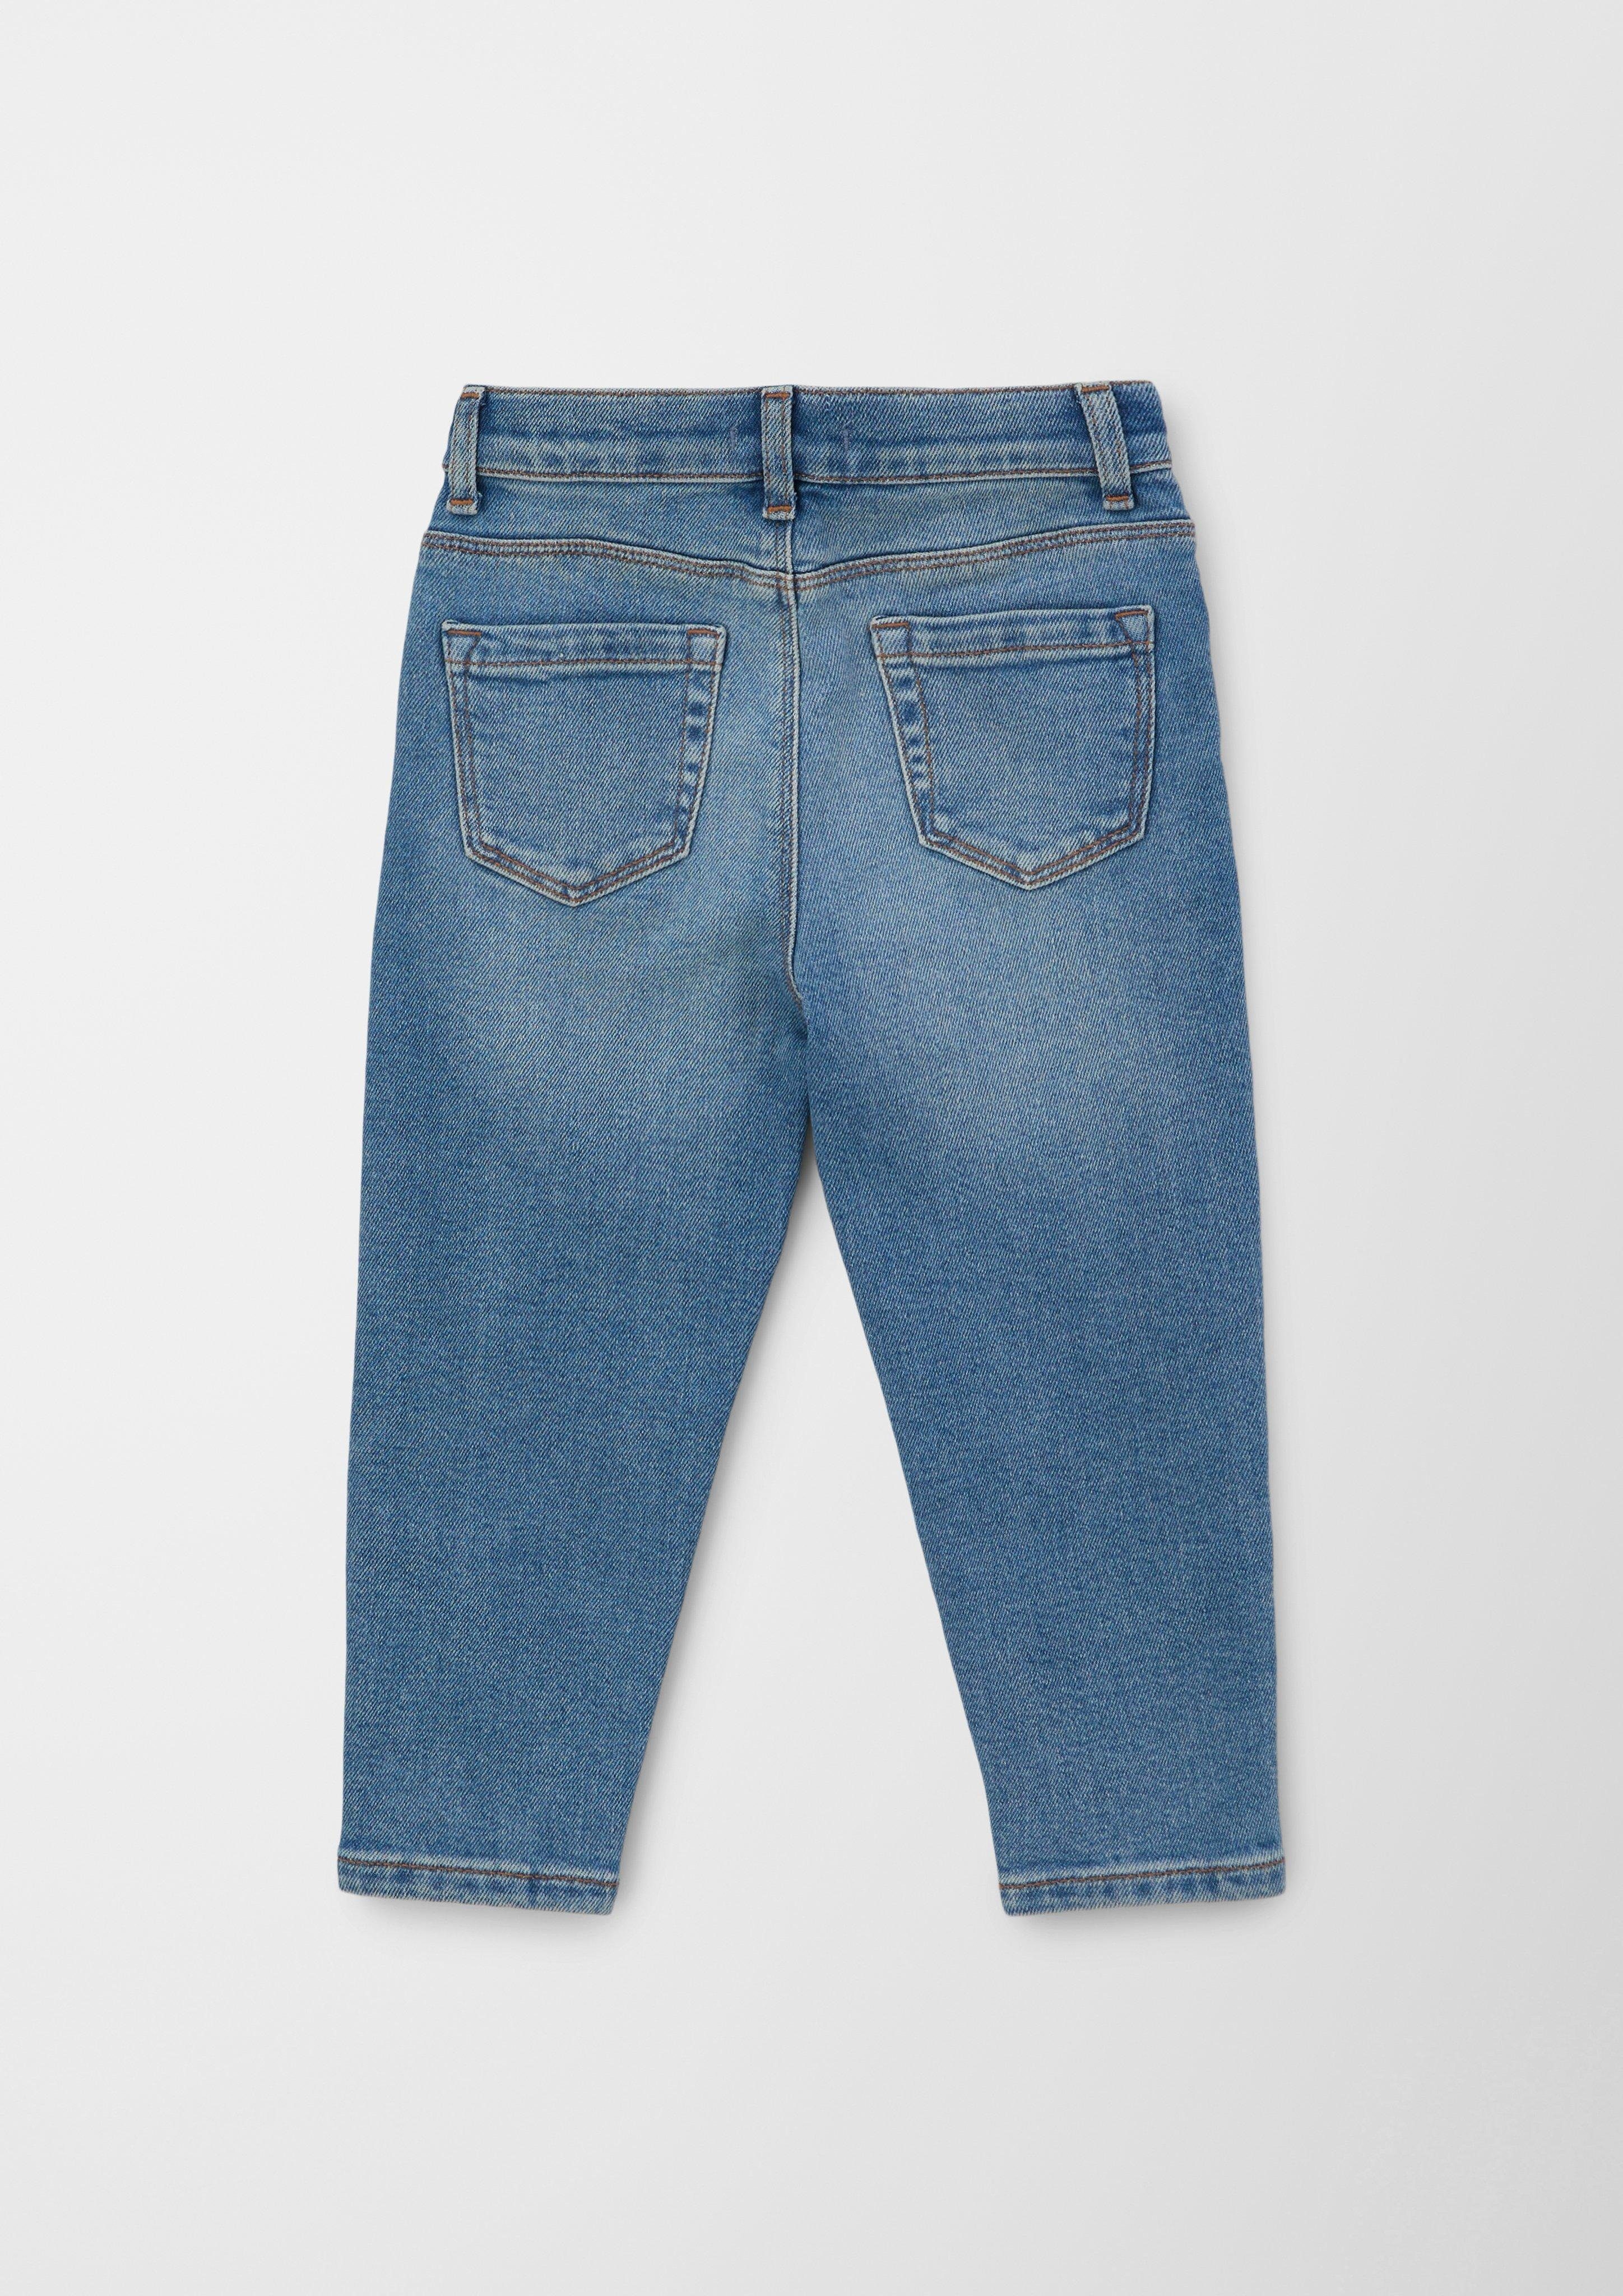 / Stoffhose Kontrastnähte Mom Tapered Fit Waschung, Rise Ankle-Jeans Relaxed Leg / s.Oliver High /